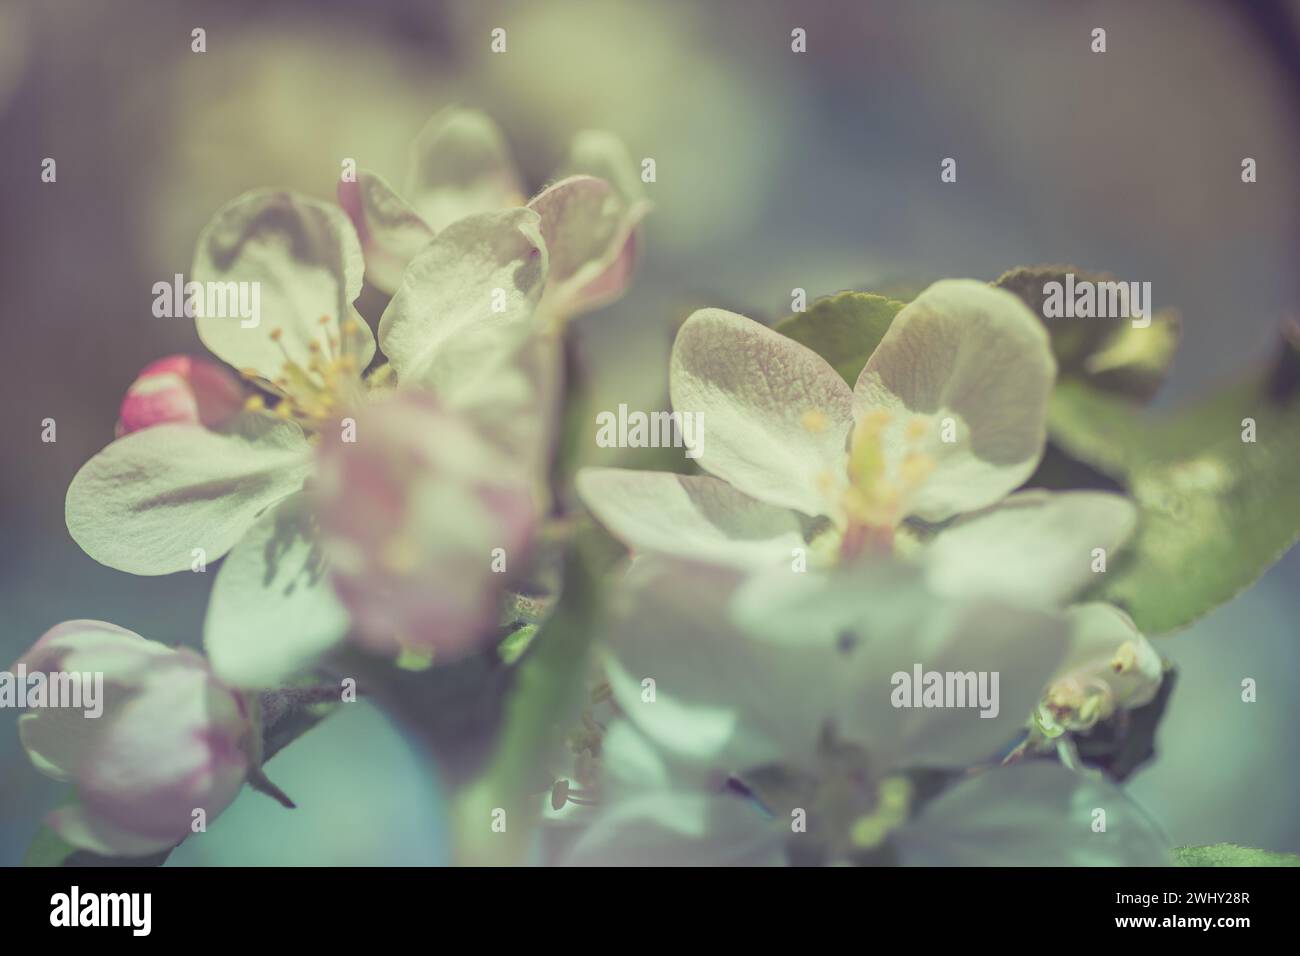 Apple blossoms over blurred nature background Stock Photo